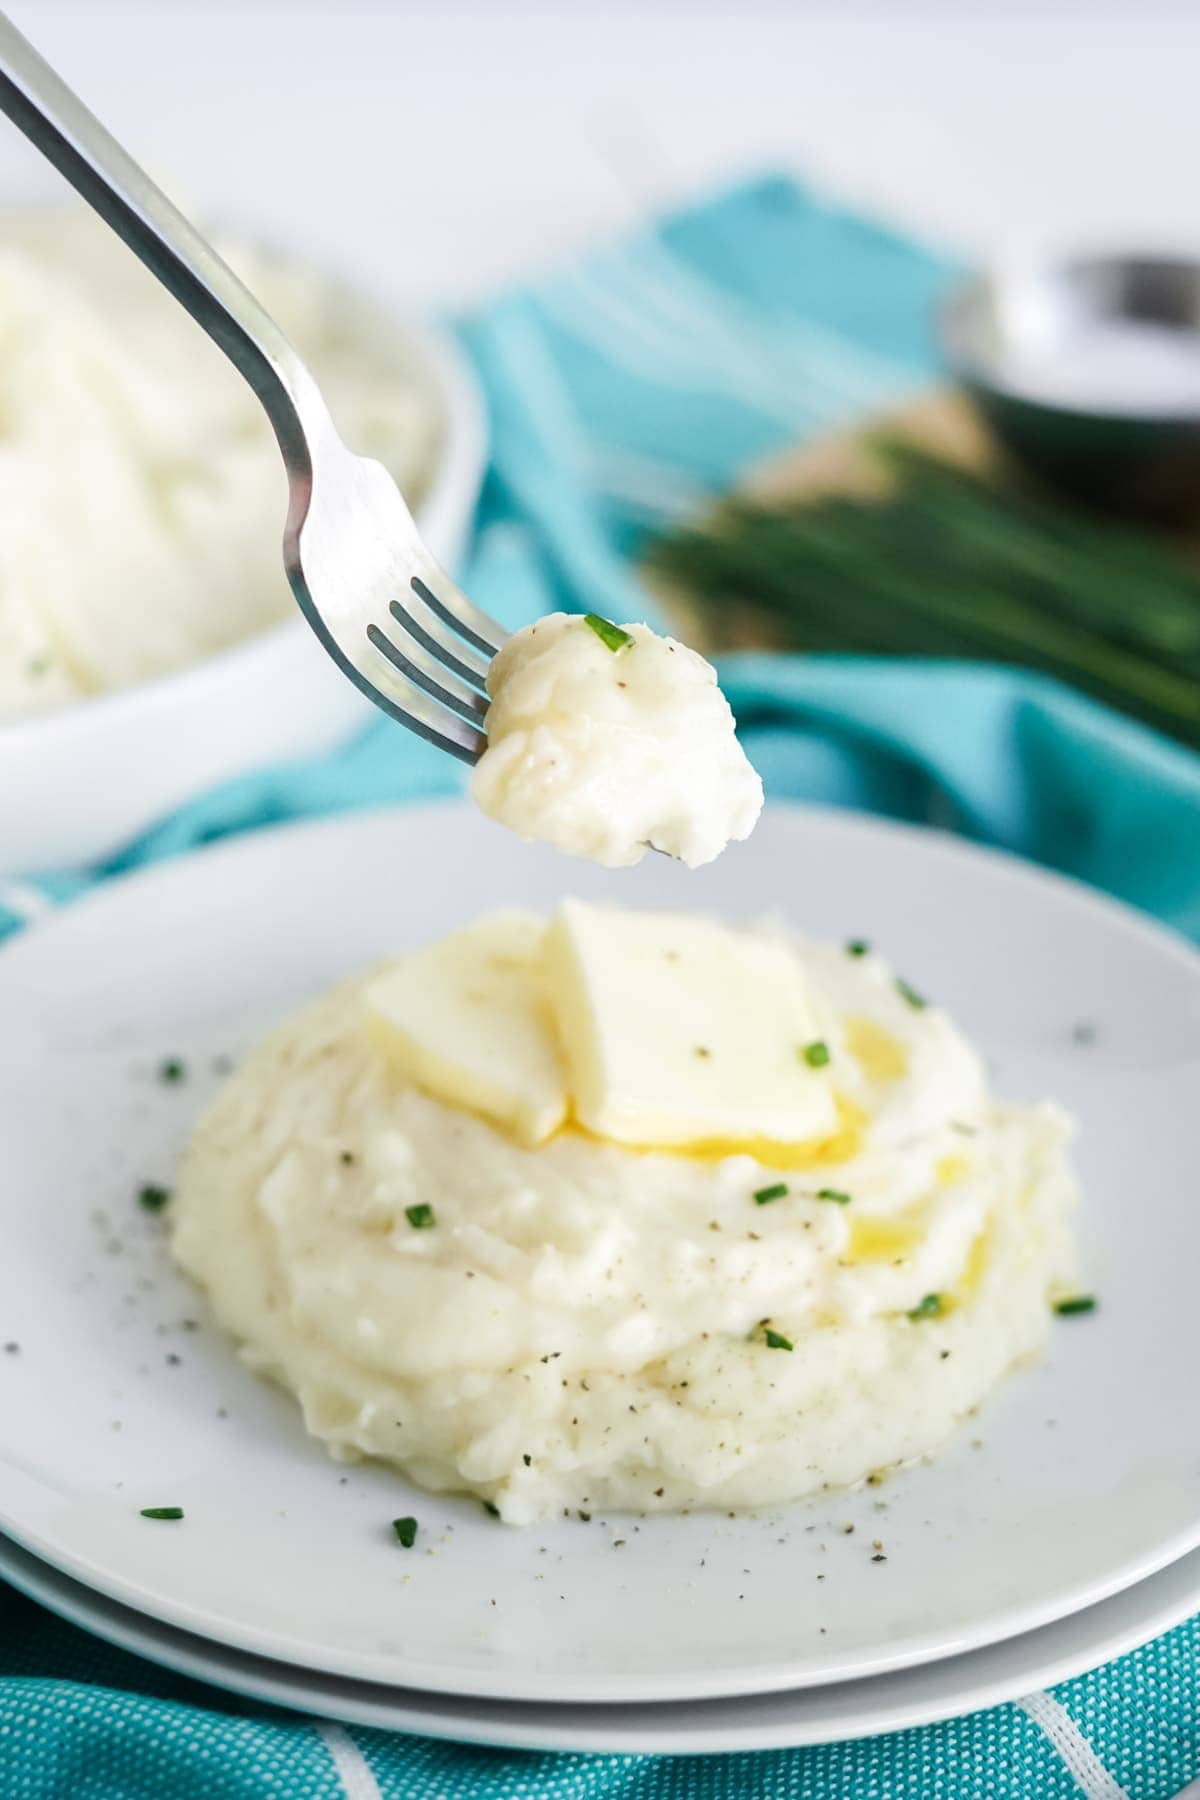 mashed potatoes on a plate with a fork